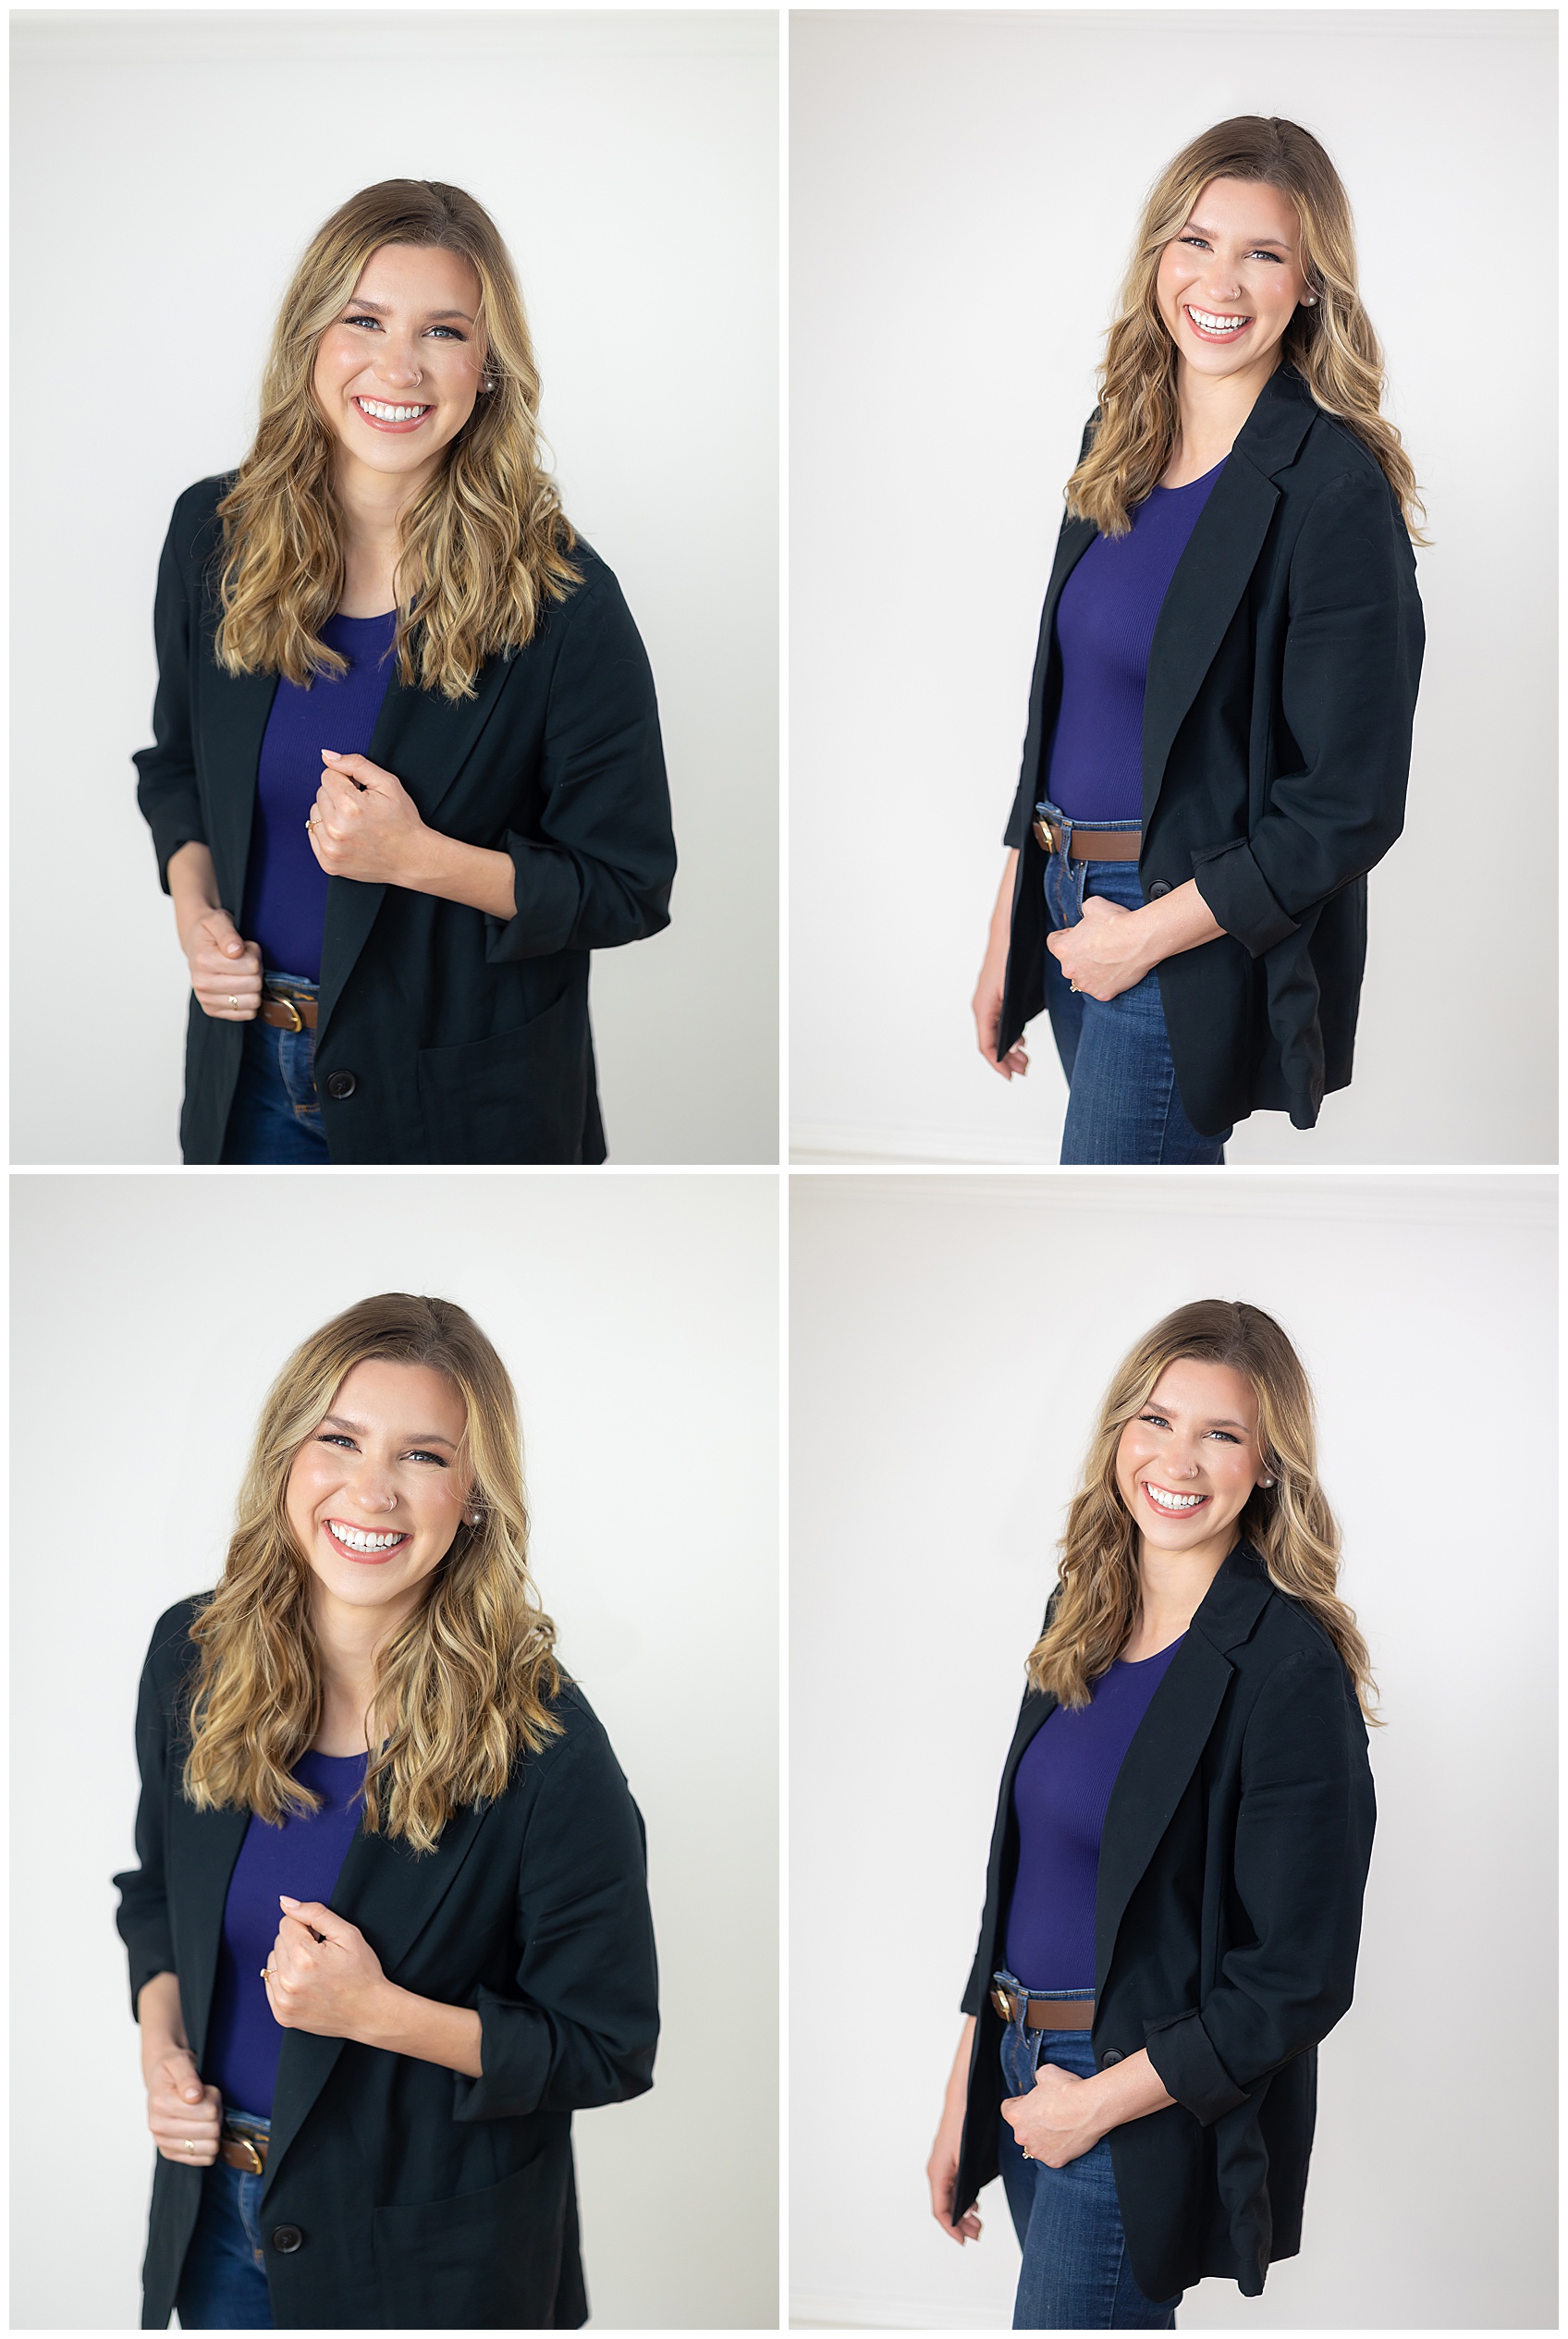 Smiling communication and event professional in a well-lit studio headshot. Confident and approachable, she exudes warmth and professionalism.